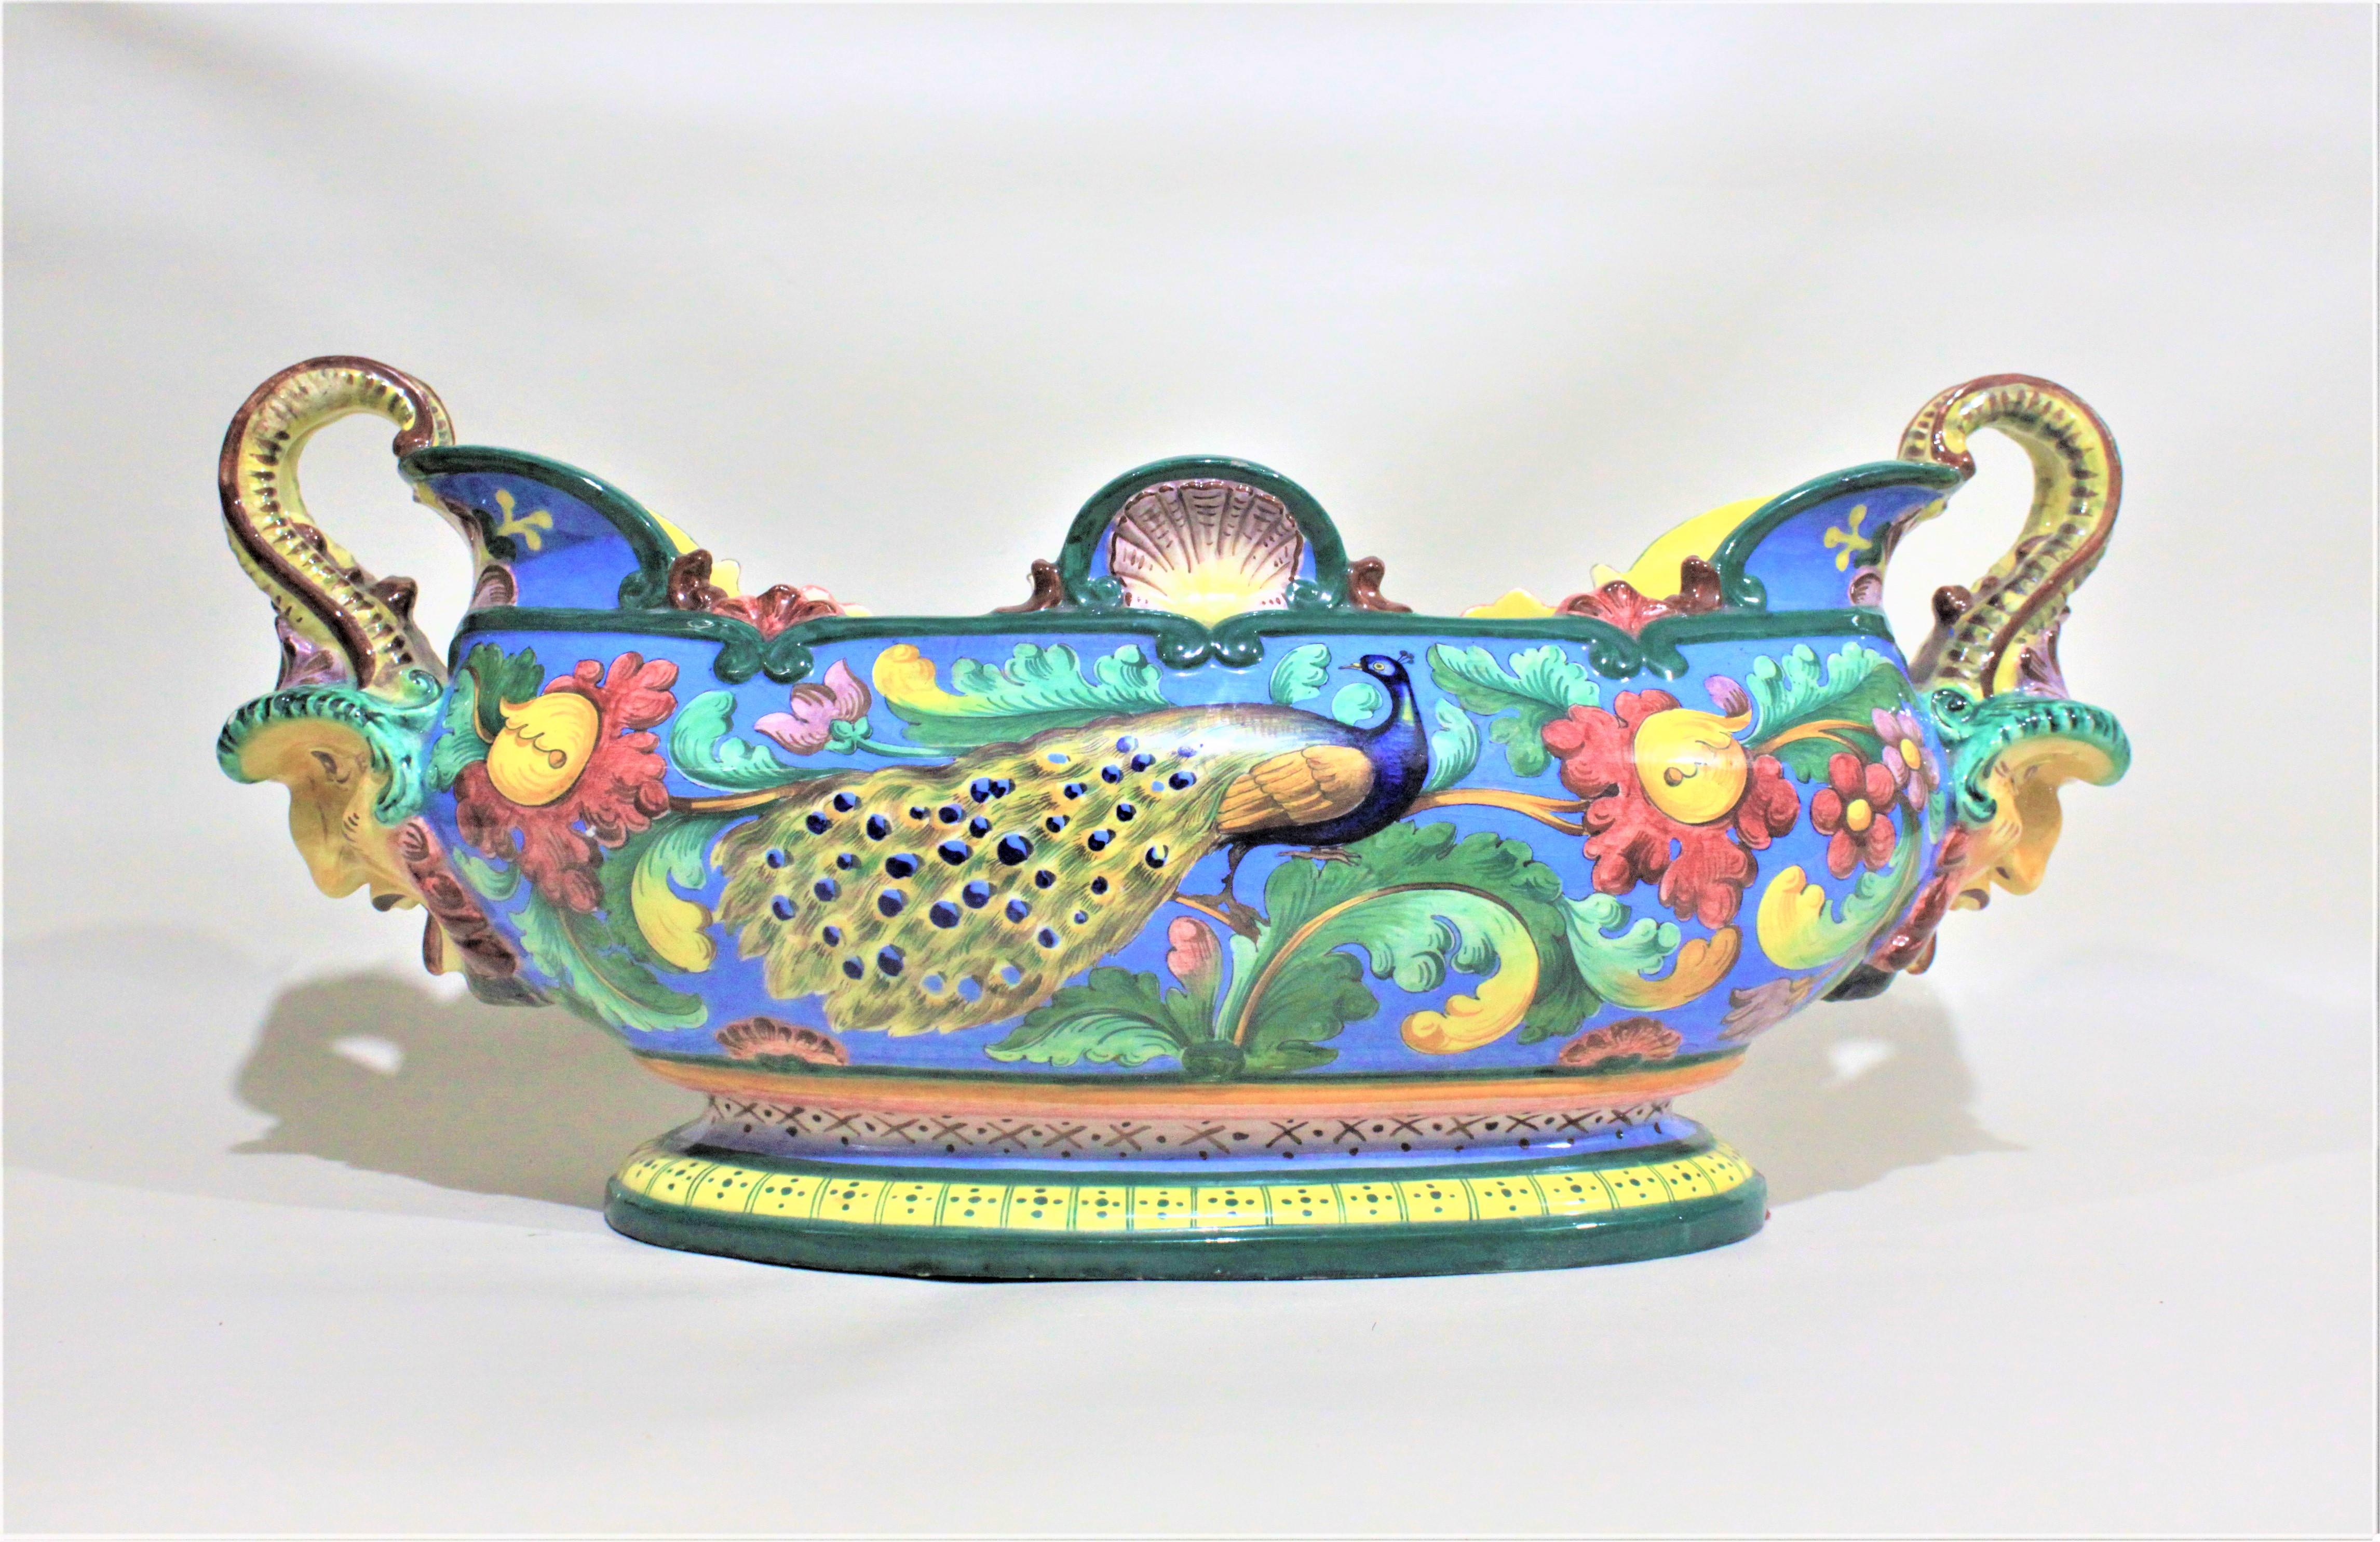 This very large and very colorful Italian Majolica centrepiece bowl was made between 1900 and 1920 in the Renaissance Revival style. The sides show hand painted blue peacocks surrounded by flowers and foliage in extremely vivid colors. The handles